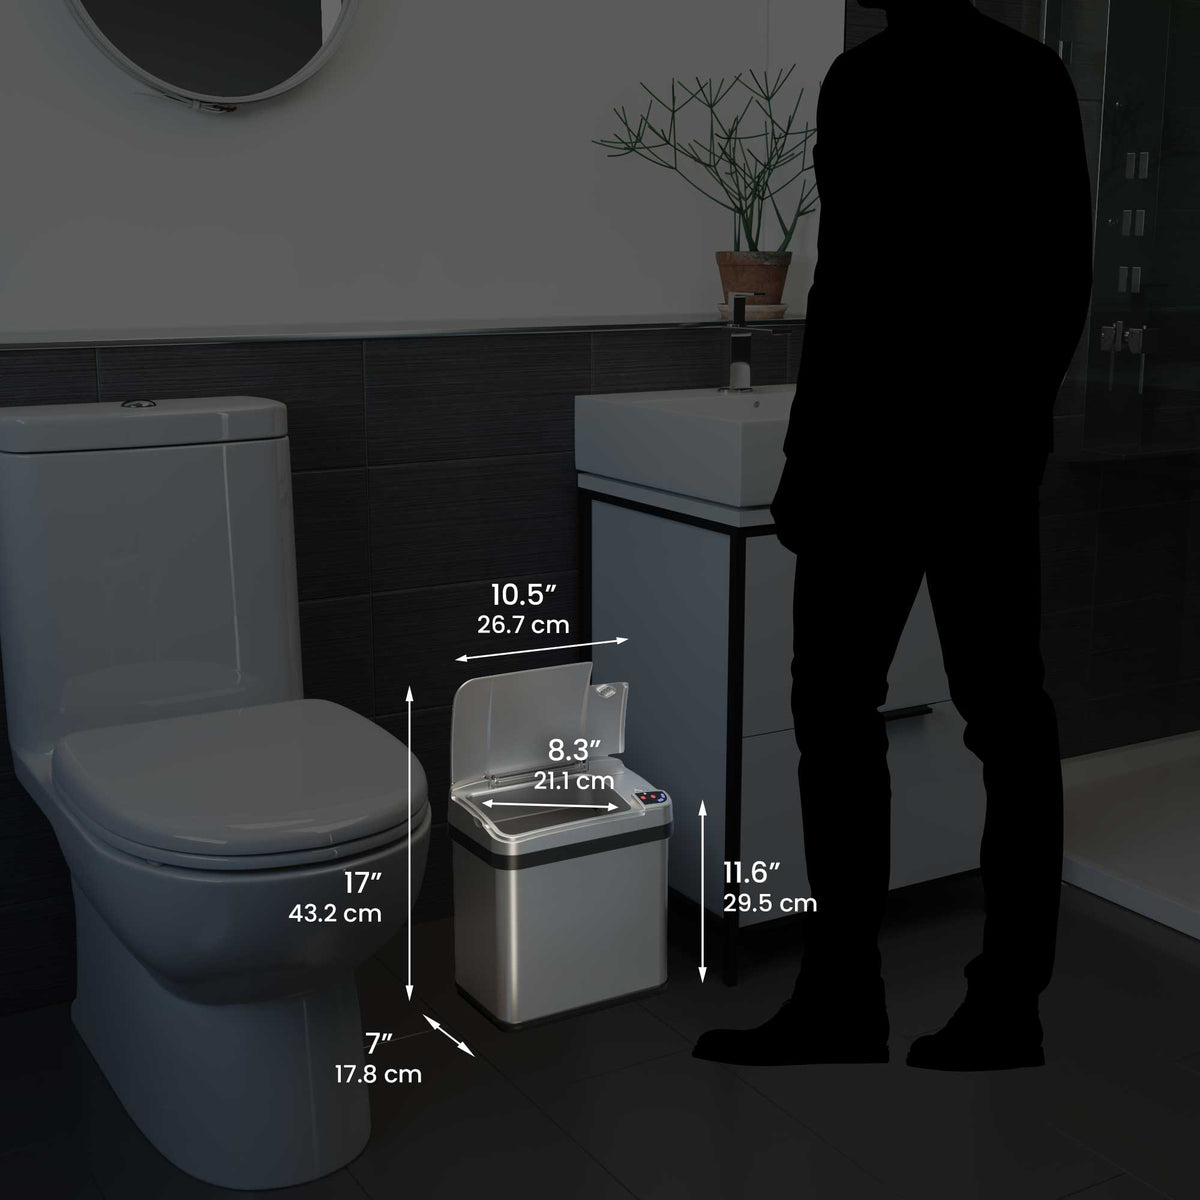 iTouchless Touchless Sensor Kitchen Trash Can and Bathroom Trash Can Combo Pack dimensions